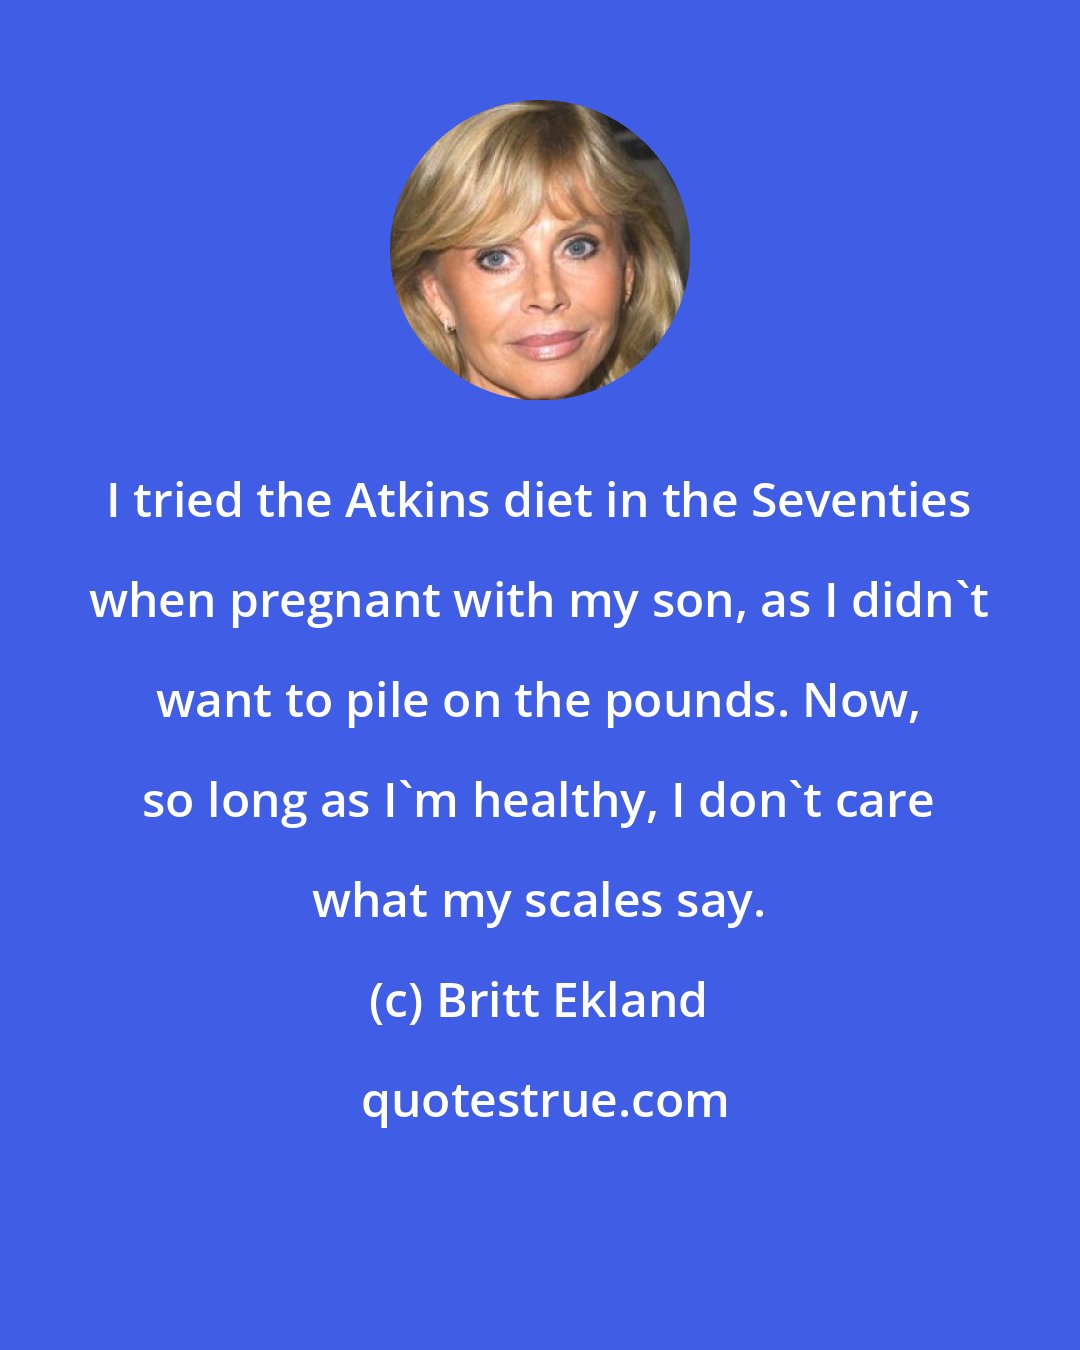 Britt Ekland: I tried the Atkins diet in the Seventies when pregnant with my son, as I didn't want to pile on the pounds. Now, so long as I'm healthy, I don't care what my scales say.